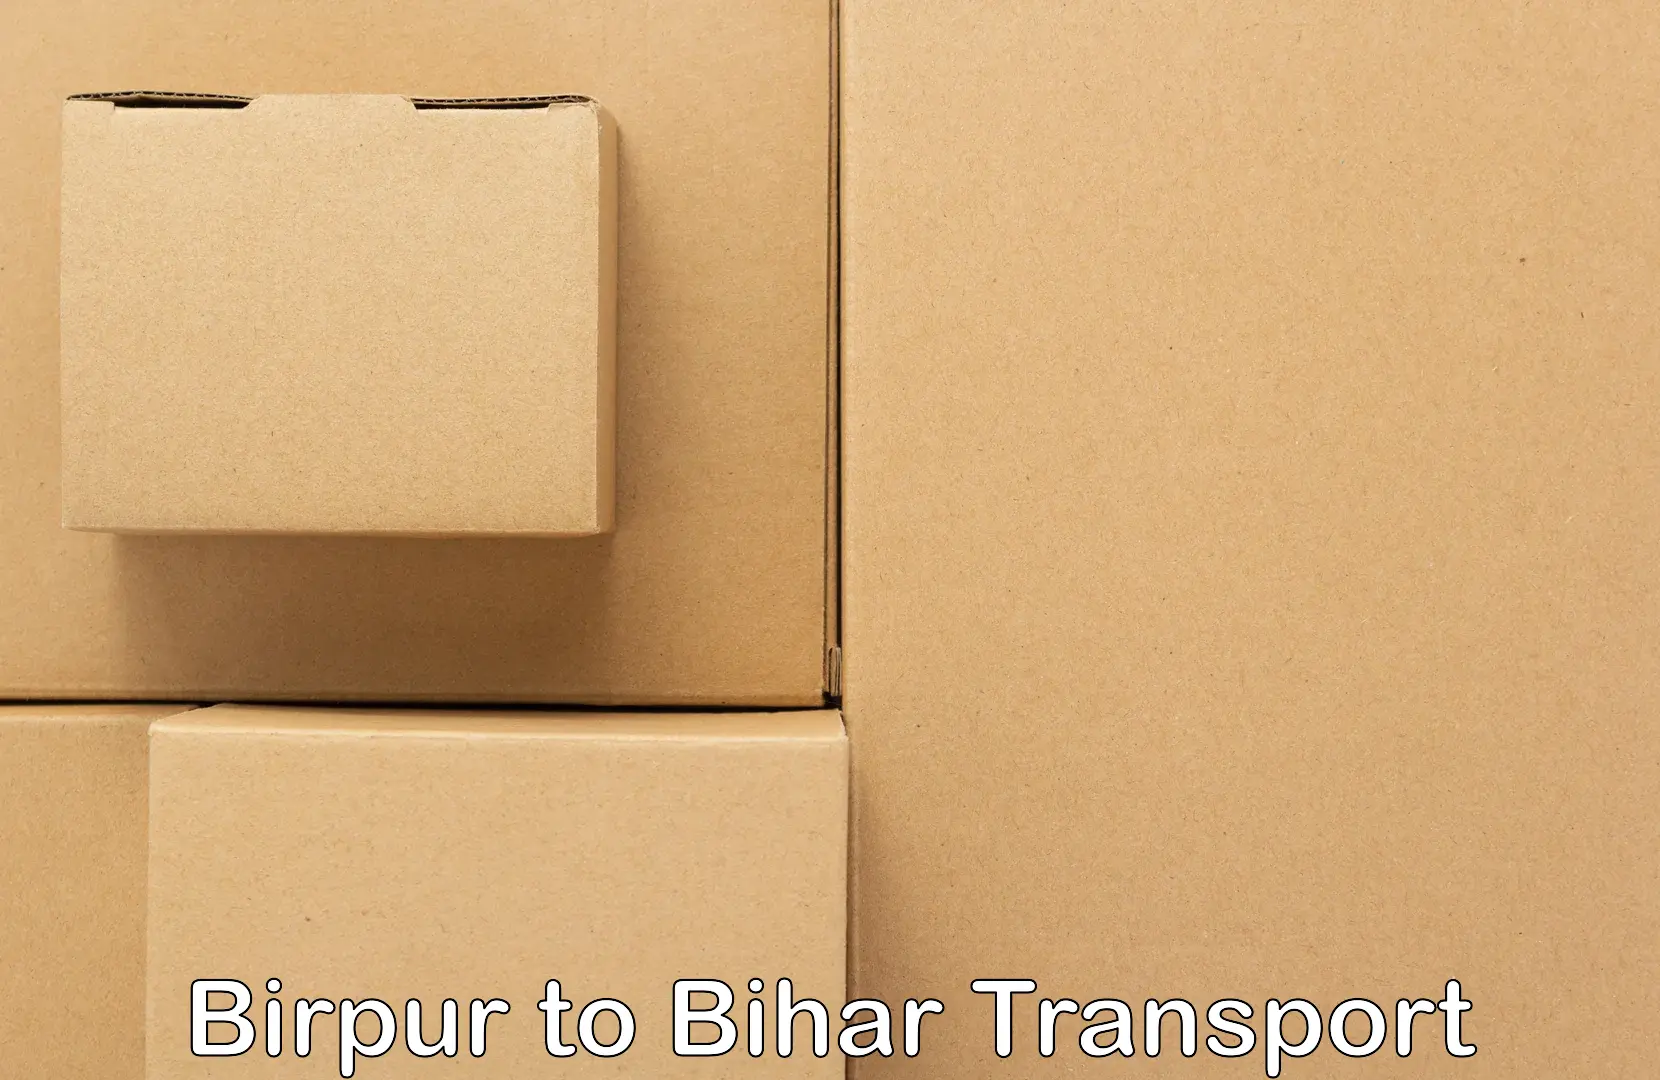 Express transport services in Birpur to Buxar